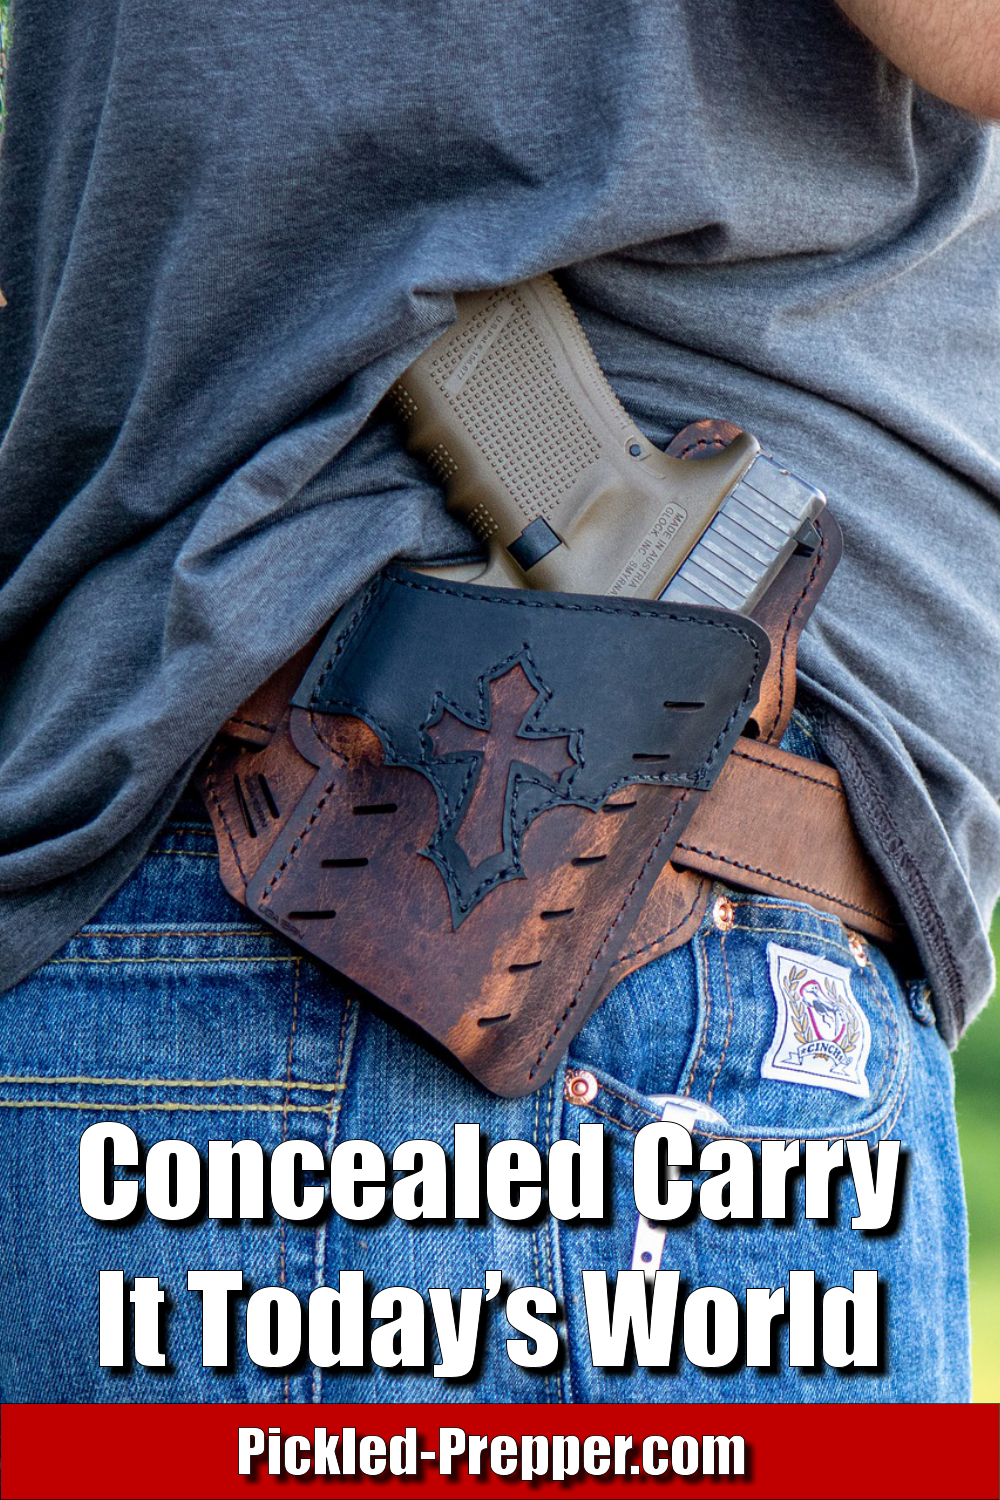 Concealed Carry Challenges in an Era of Protests